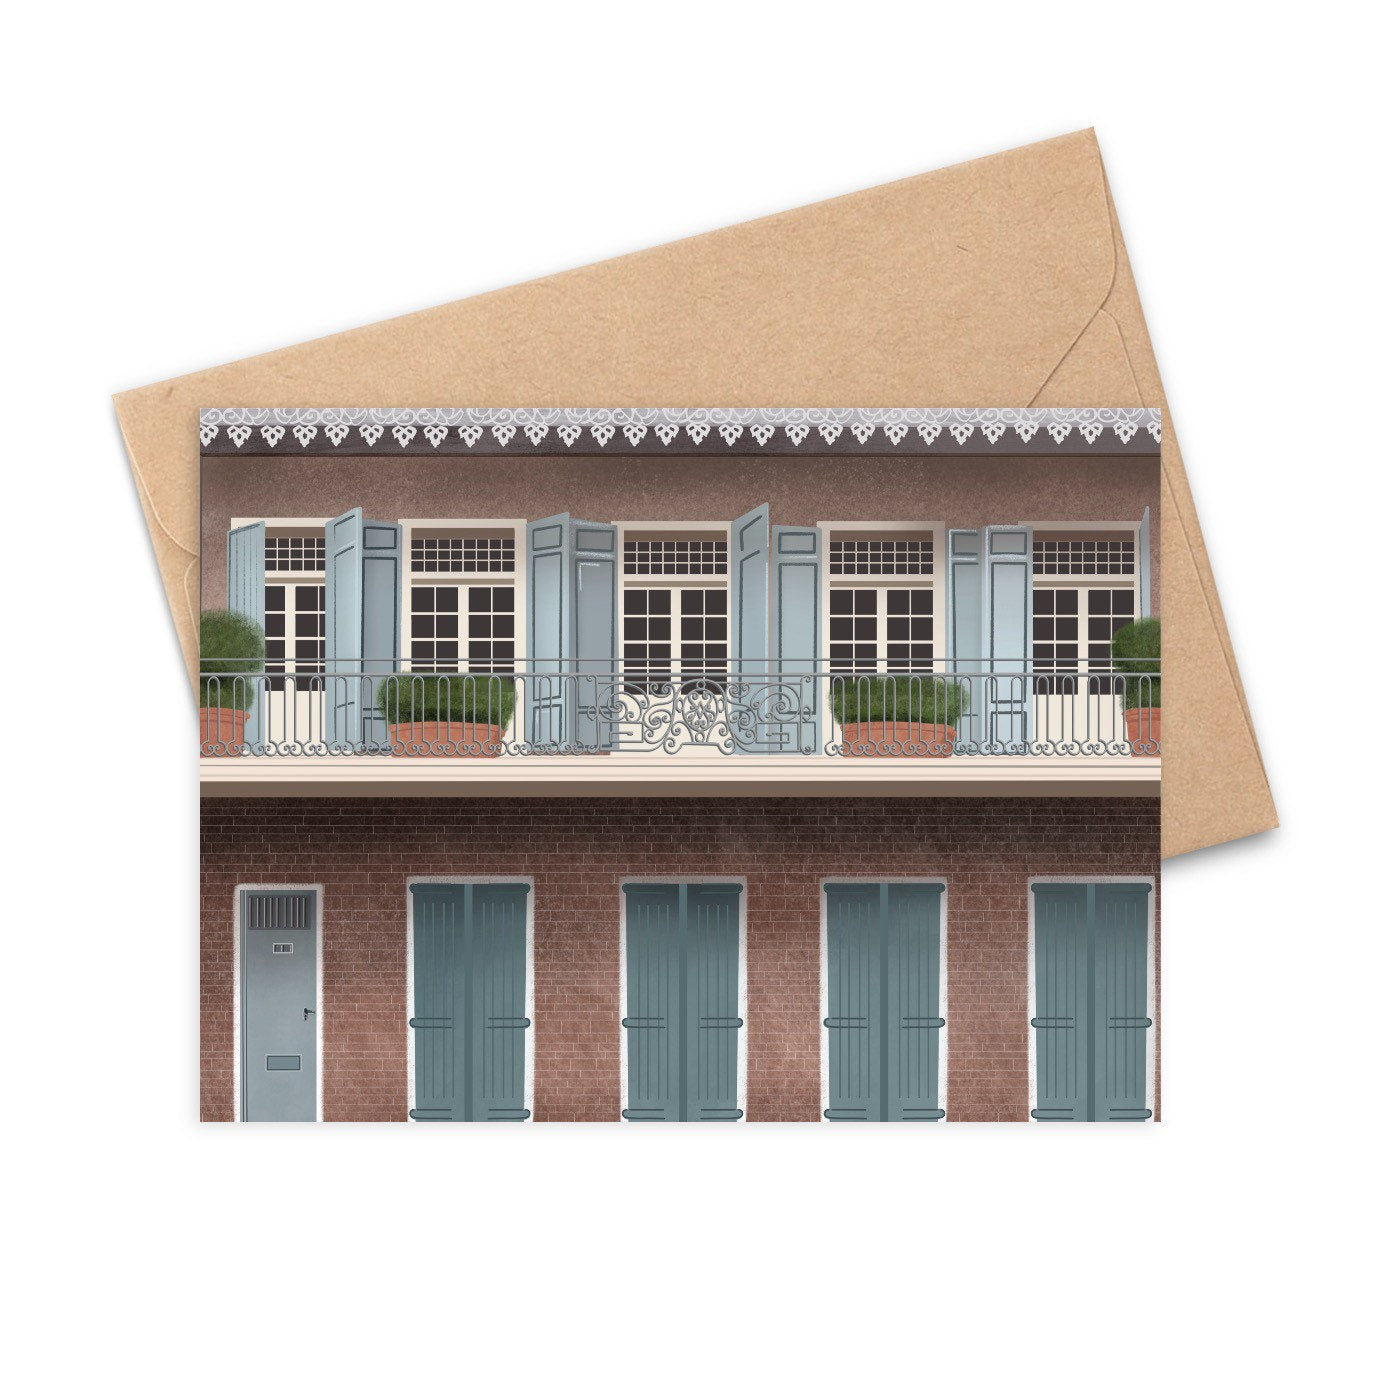 This card features a hand-illustrated drawing of a beautiful house in New Orleans.